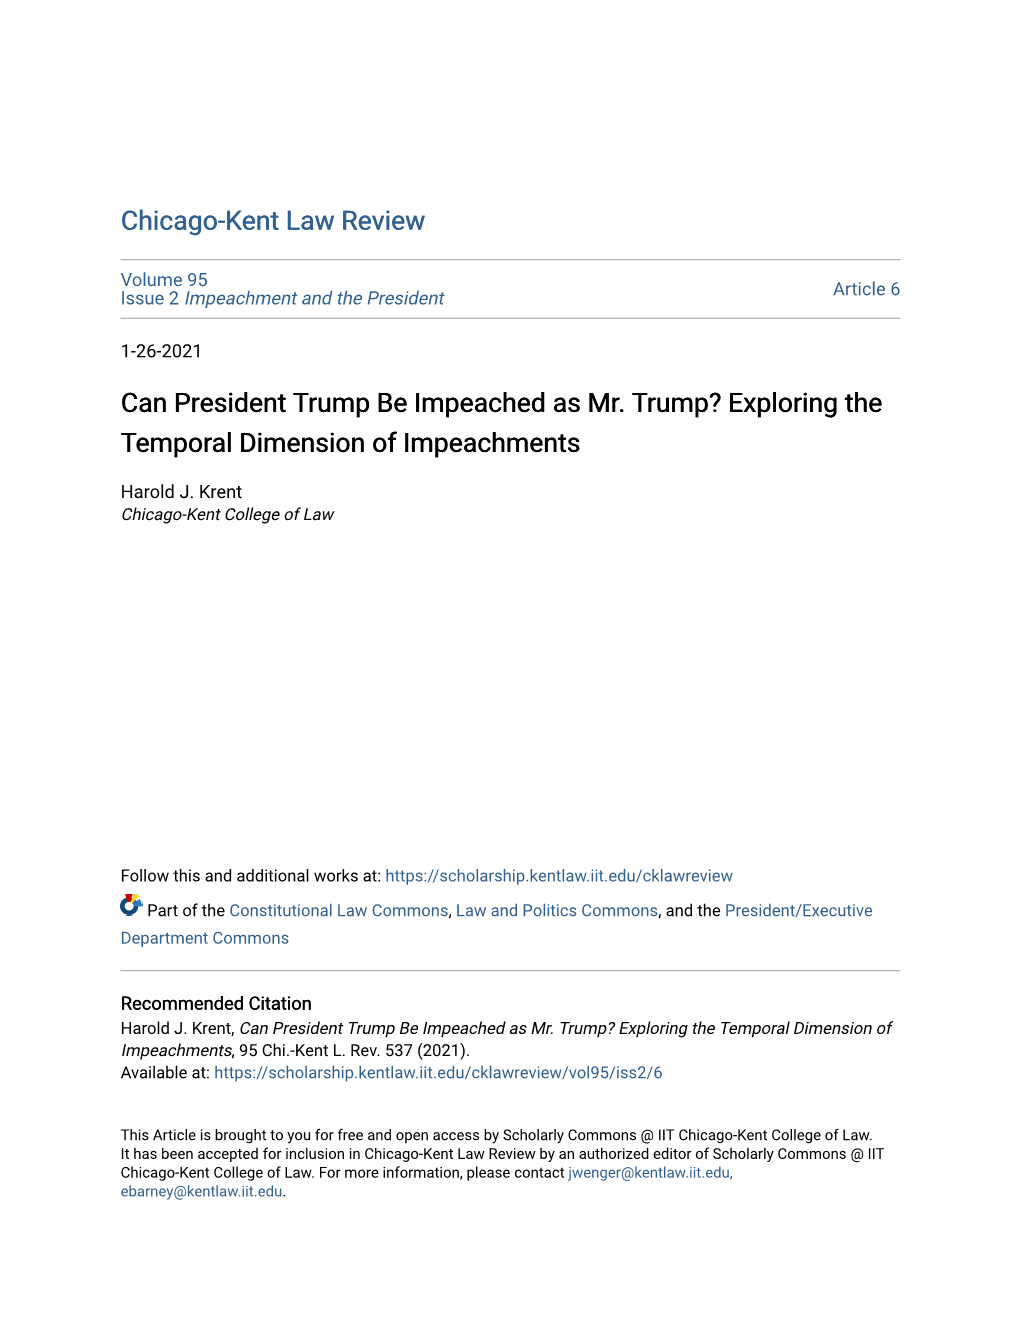 Can President Trump Be Impeached As Mr. Trump? Exploring the Temporal Dimension of Impeachments